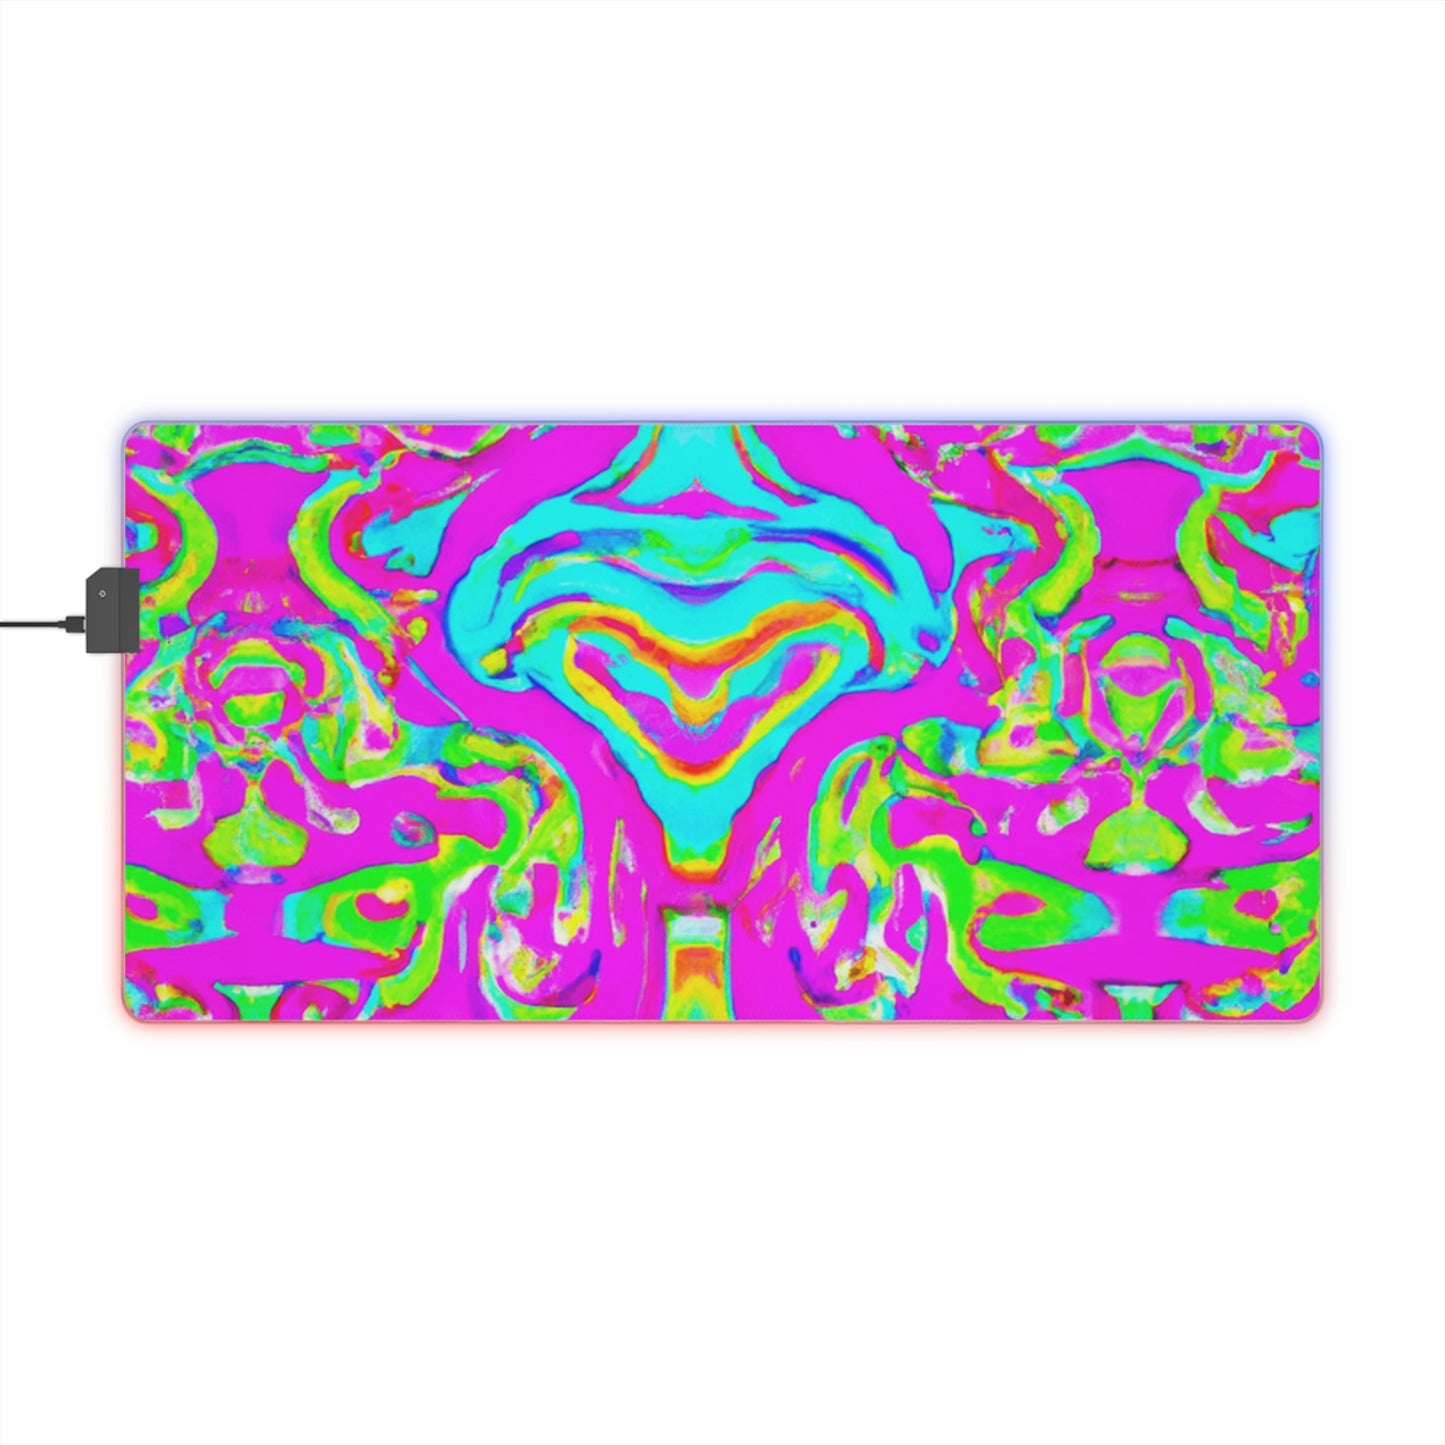 Rocky Rockabilly - Psychedelic Trippy LED Light Up Gaming Mouse Pad